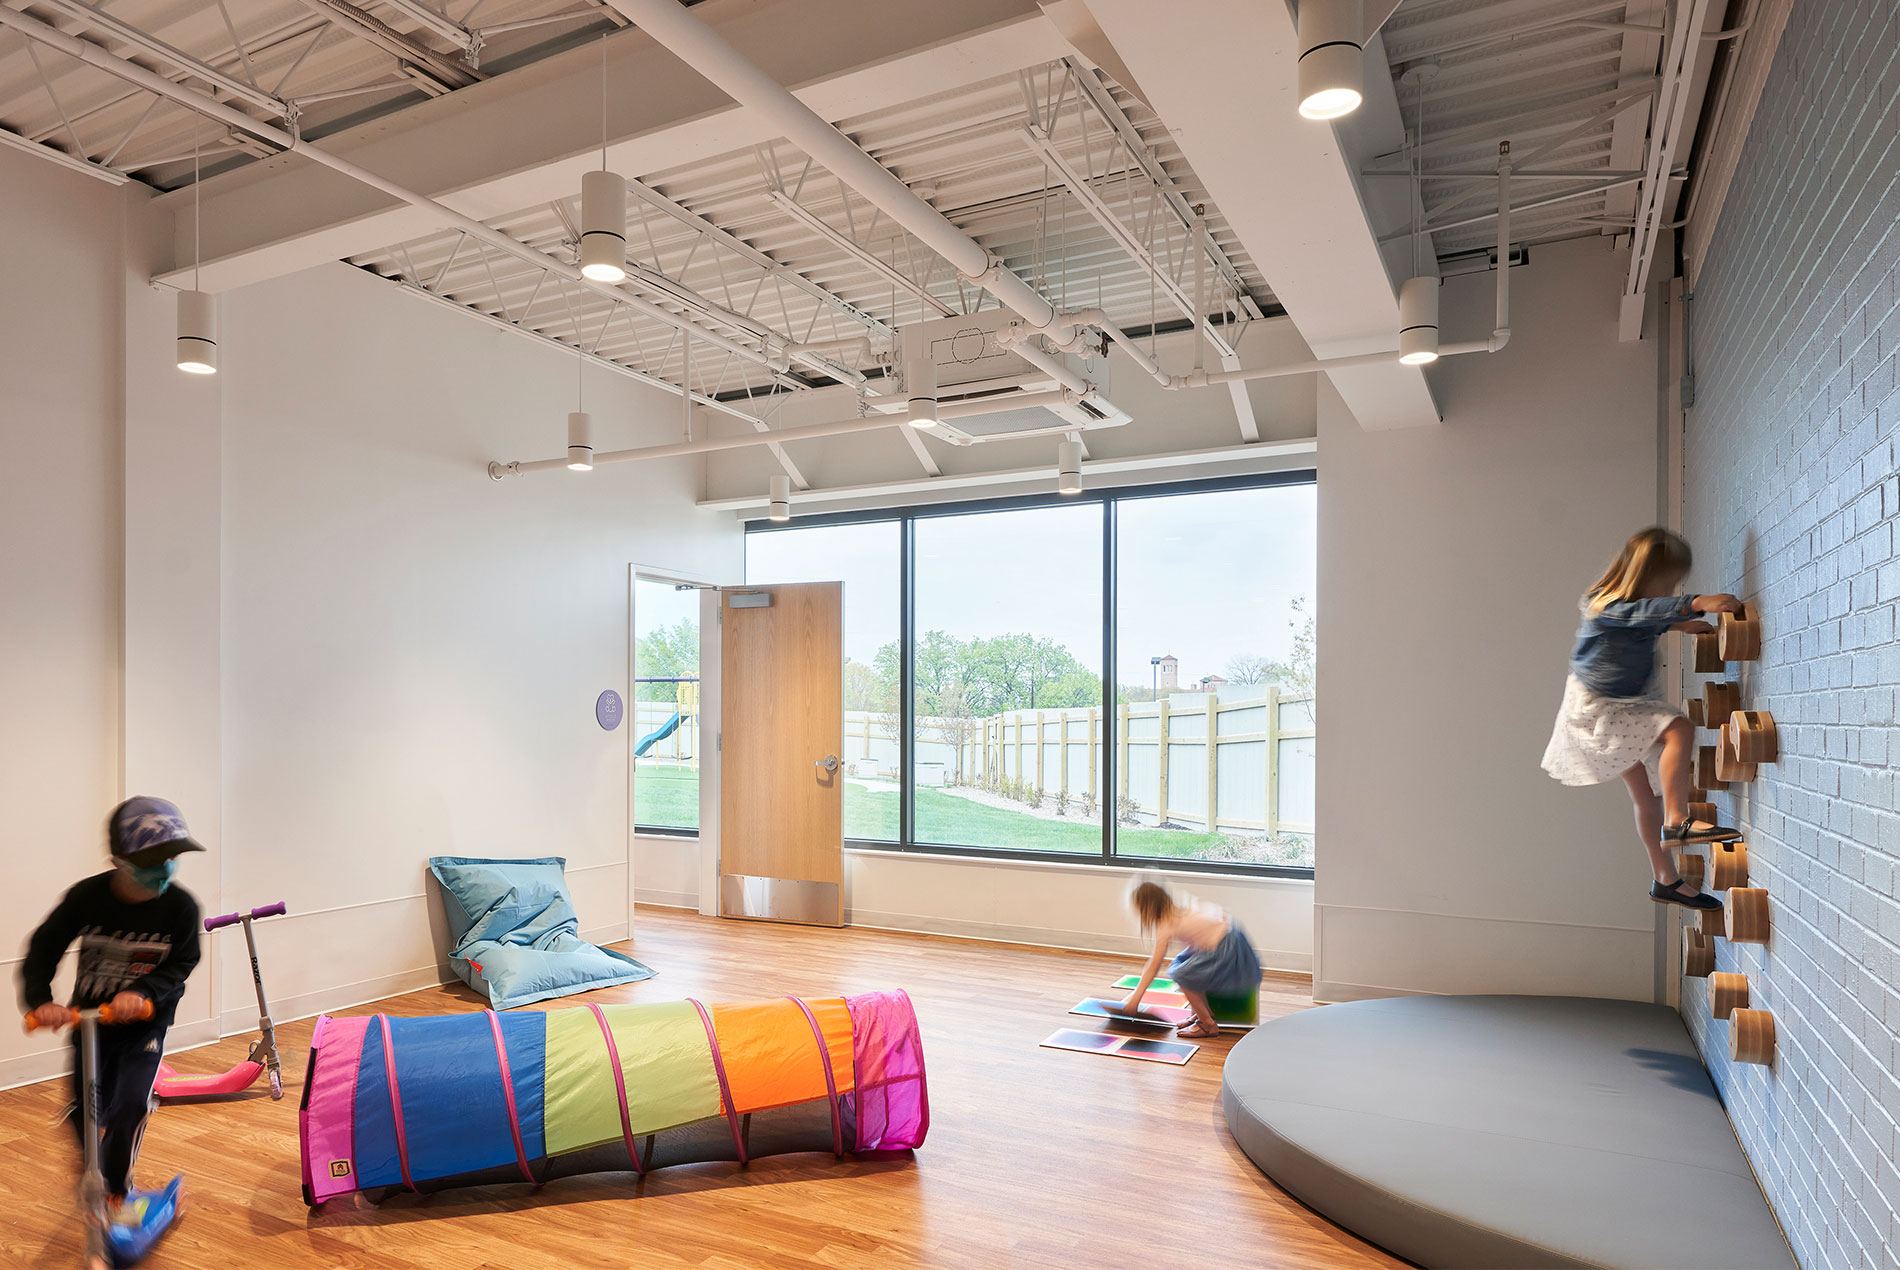 The Children's Place HOK Designers on Creating Inclusive Pediatric Healthcare Environments for Neurodiverse Patients